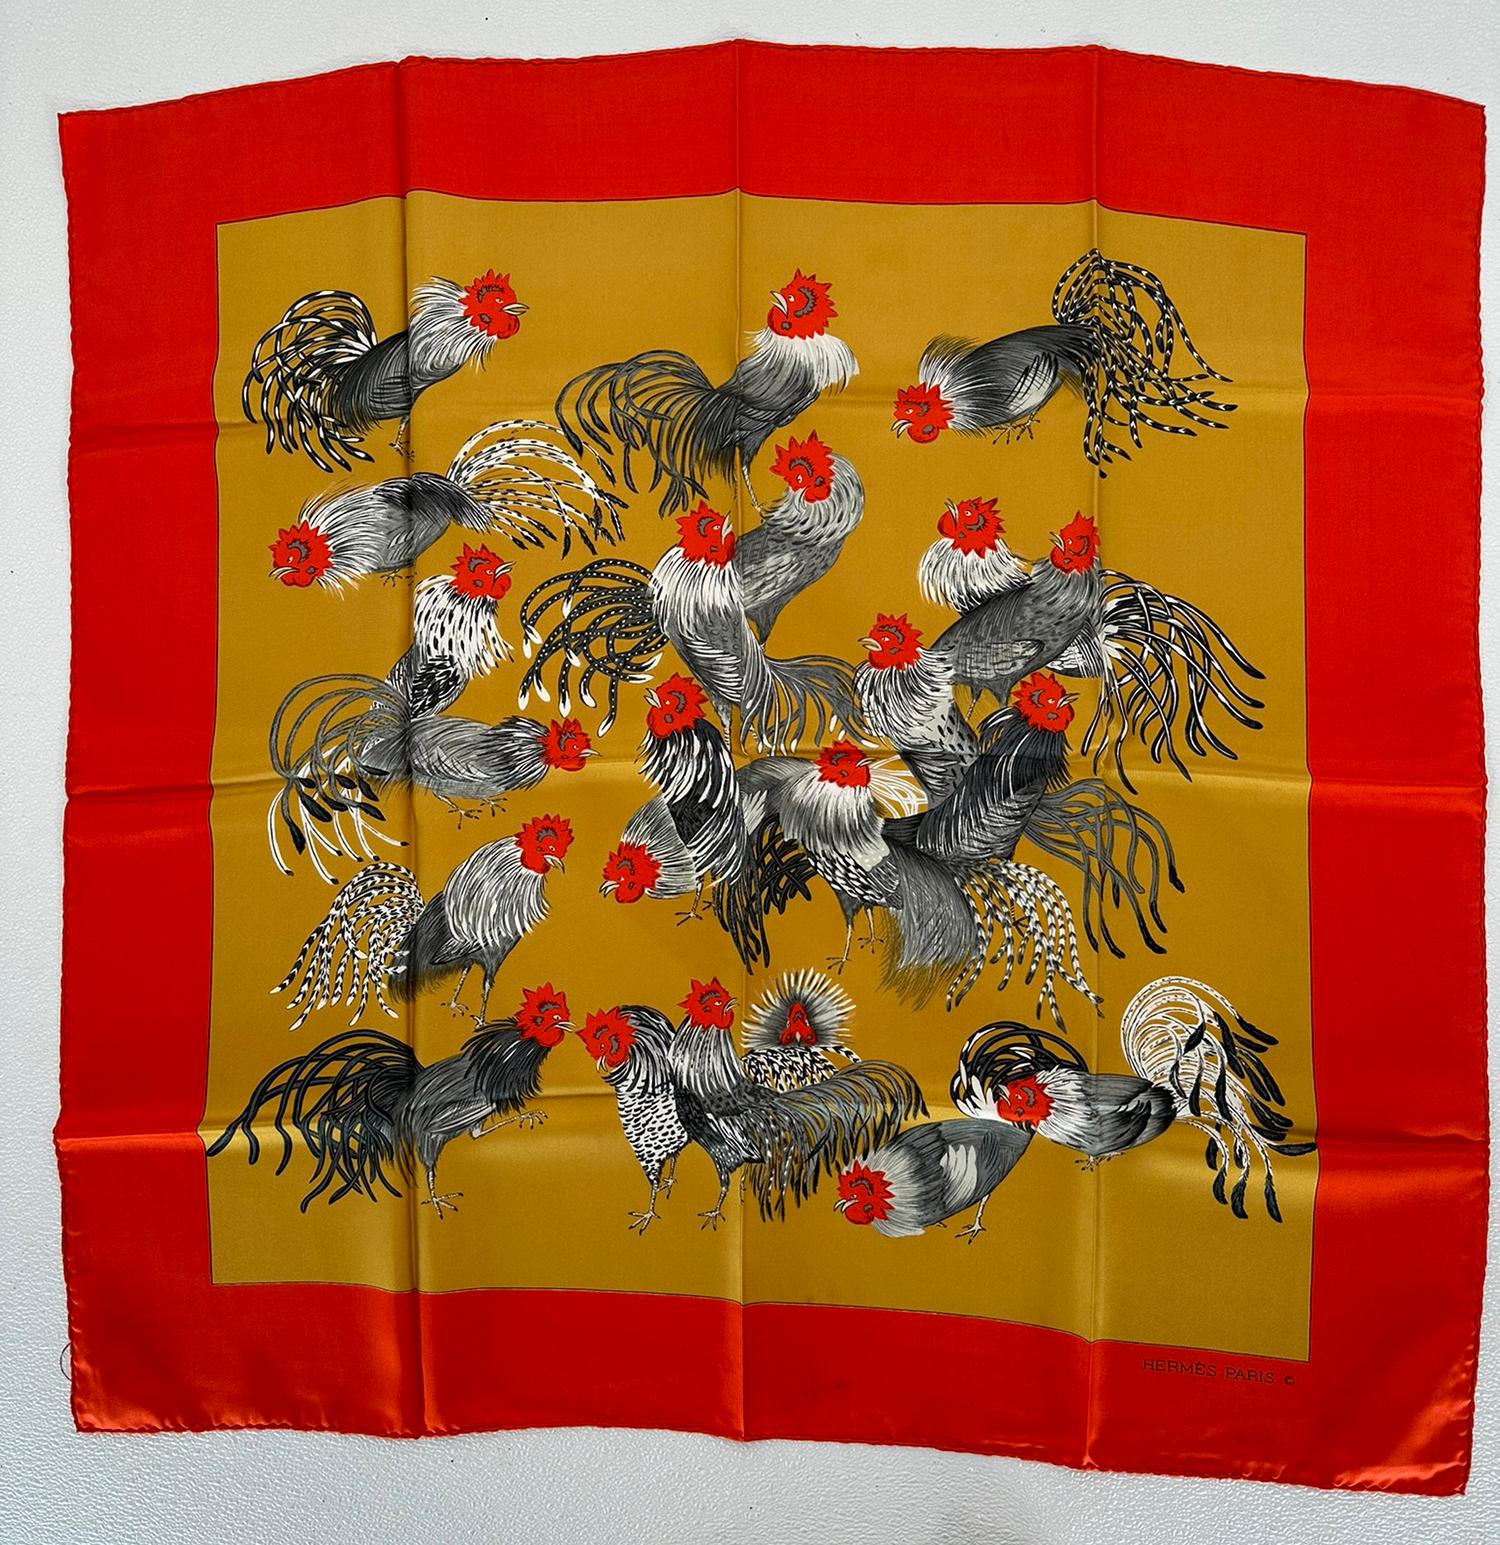 Hermes Paris Jeunes Coqs Vintage Silk Twill Scarf Designed Madame La Torre 1966, with only one edition, which makes this scarf quite rare. This in gold with a bright orange border was carefully stored it is crisp with full hems. There are two faint